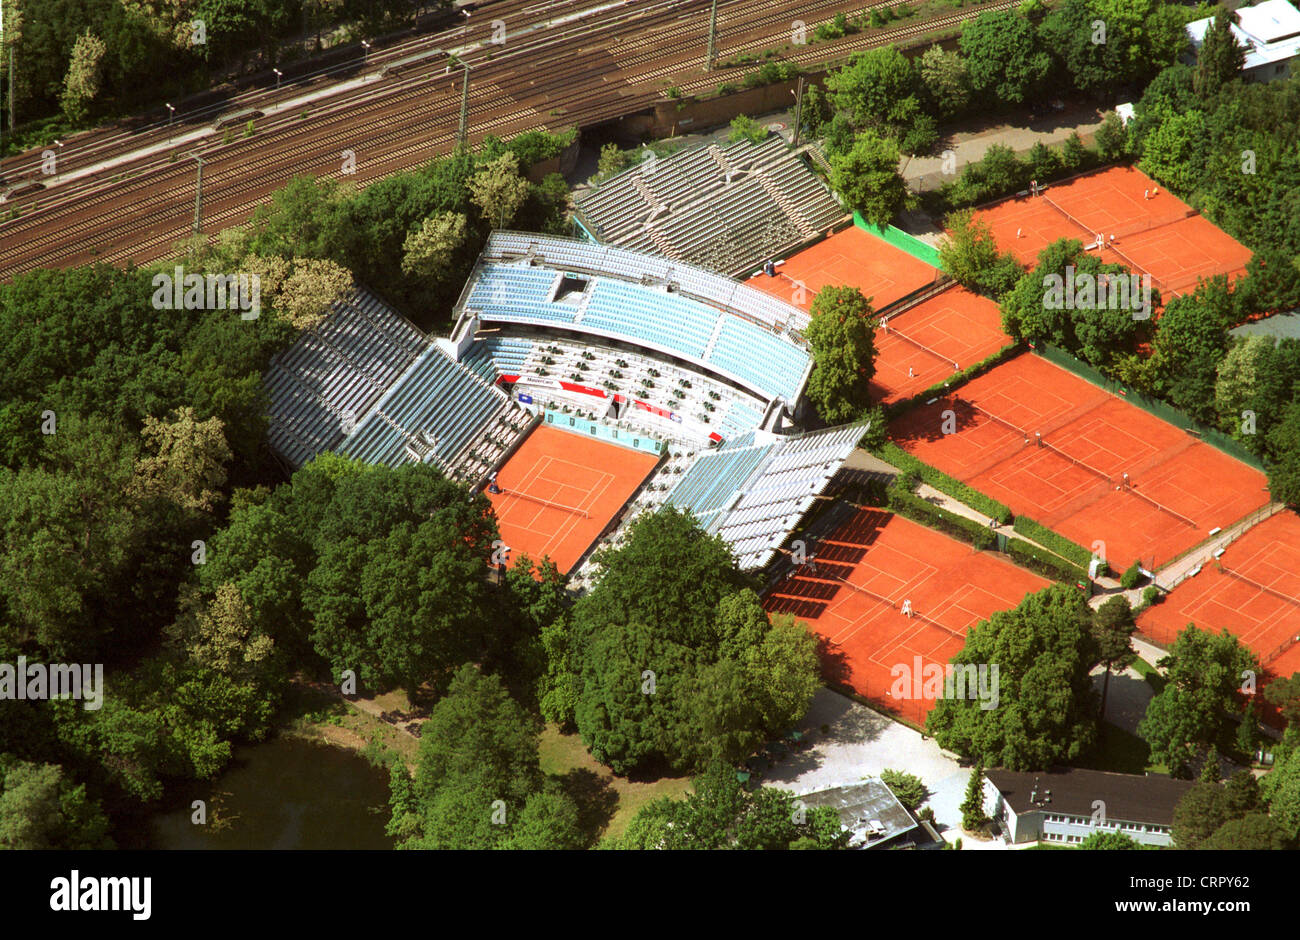 Conditioning of the tennis club Rot-Weiss, Aerial Stock Photo - Alamy